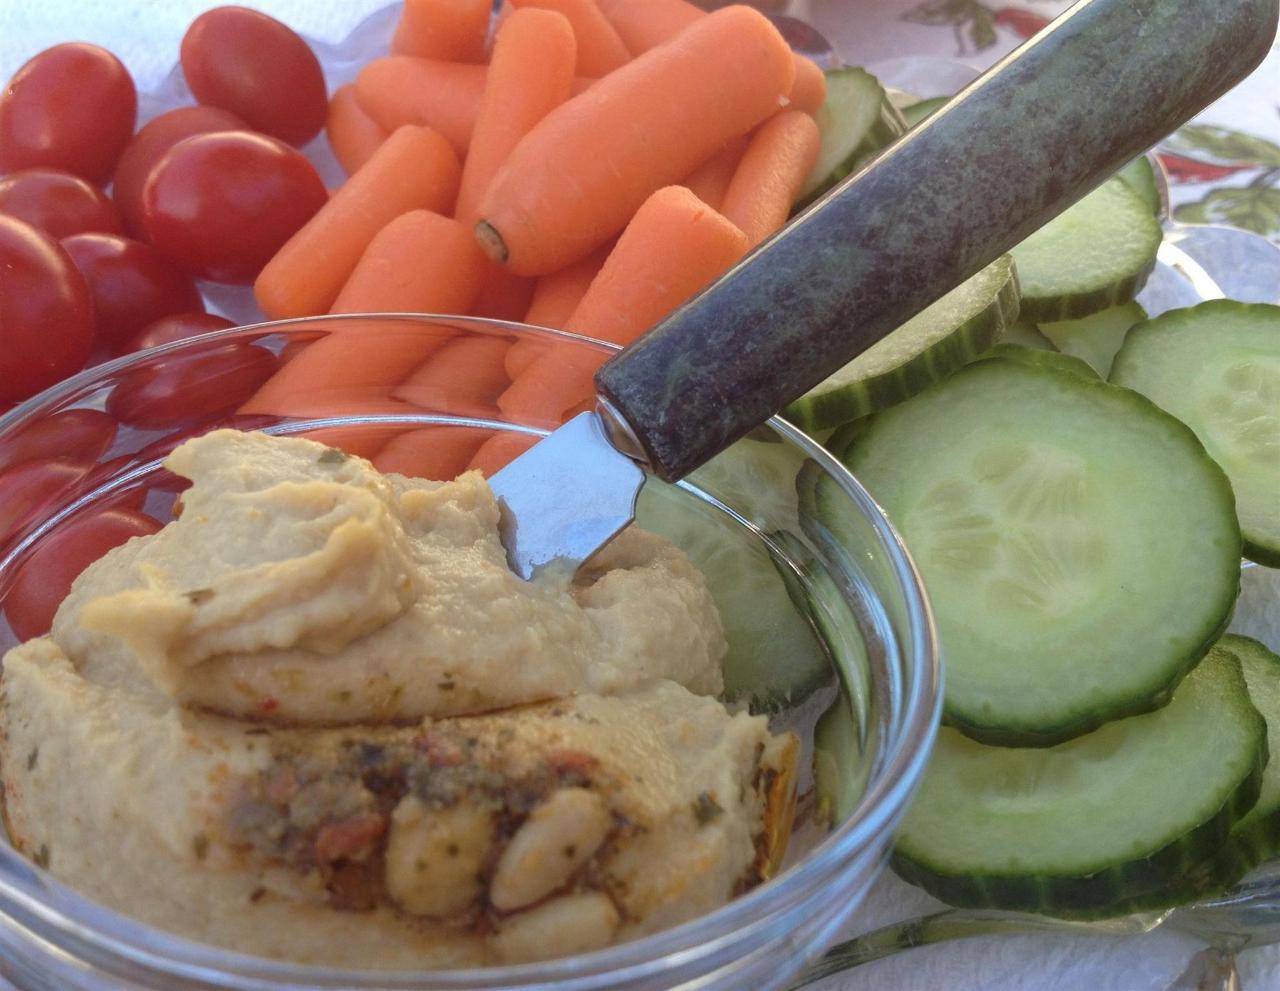 Enjoy a Fresh Wine Country Snack with Homemade Hummus & Fresh Vegtables